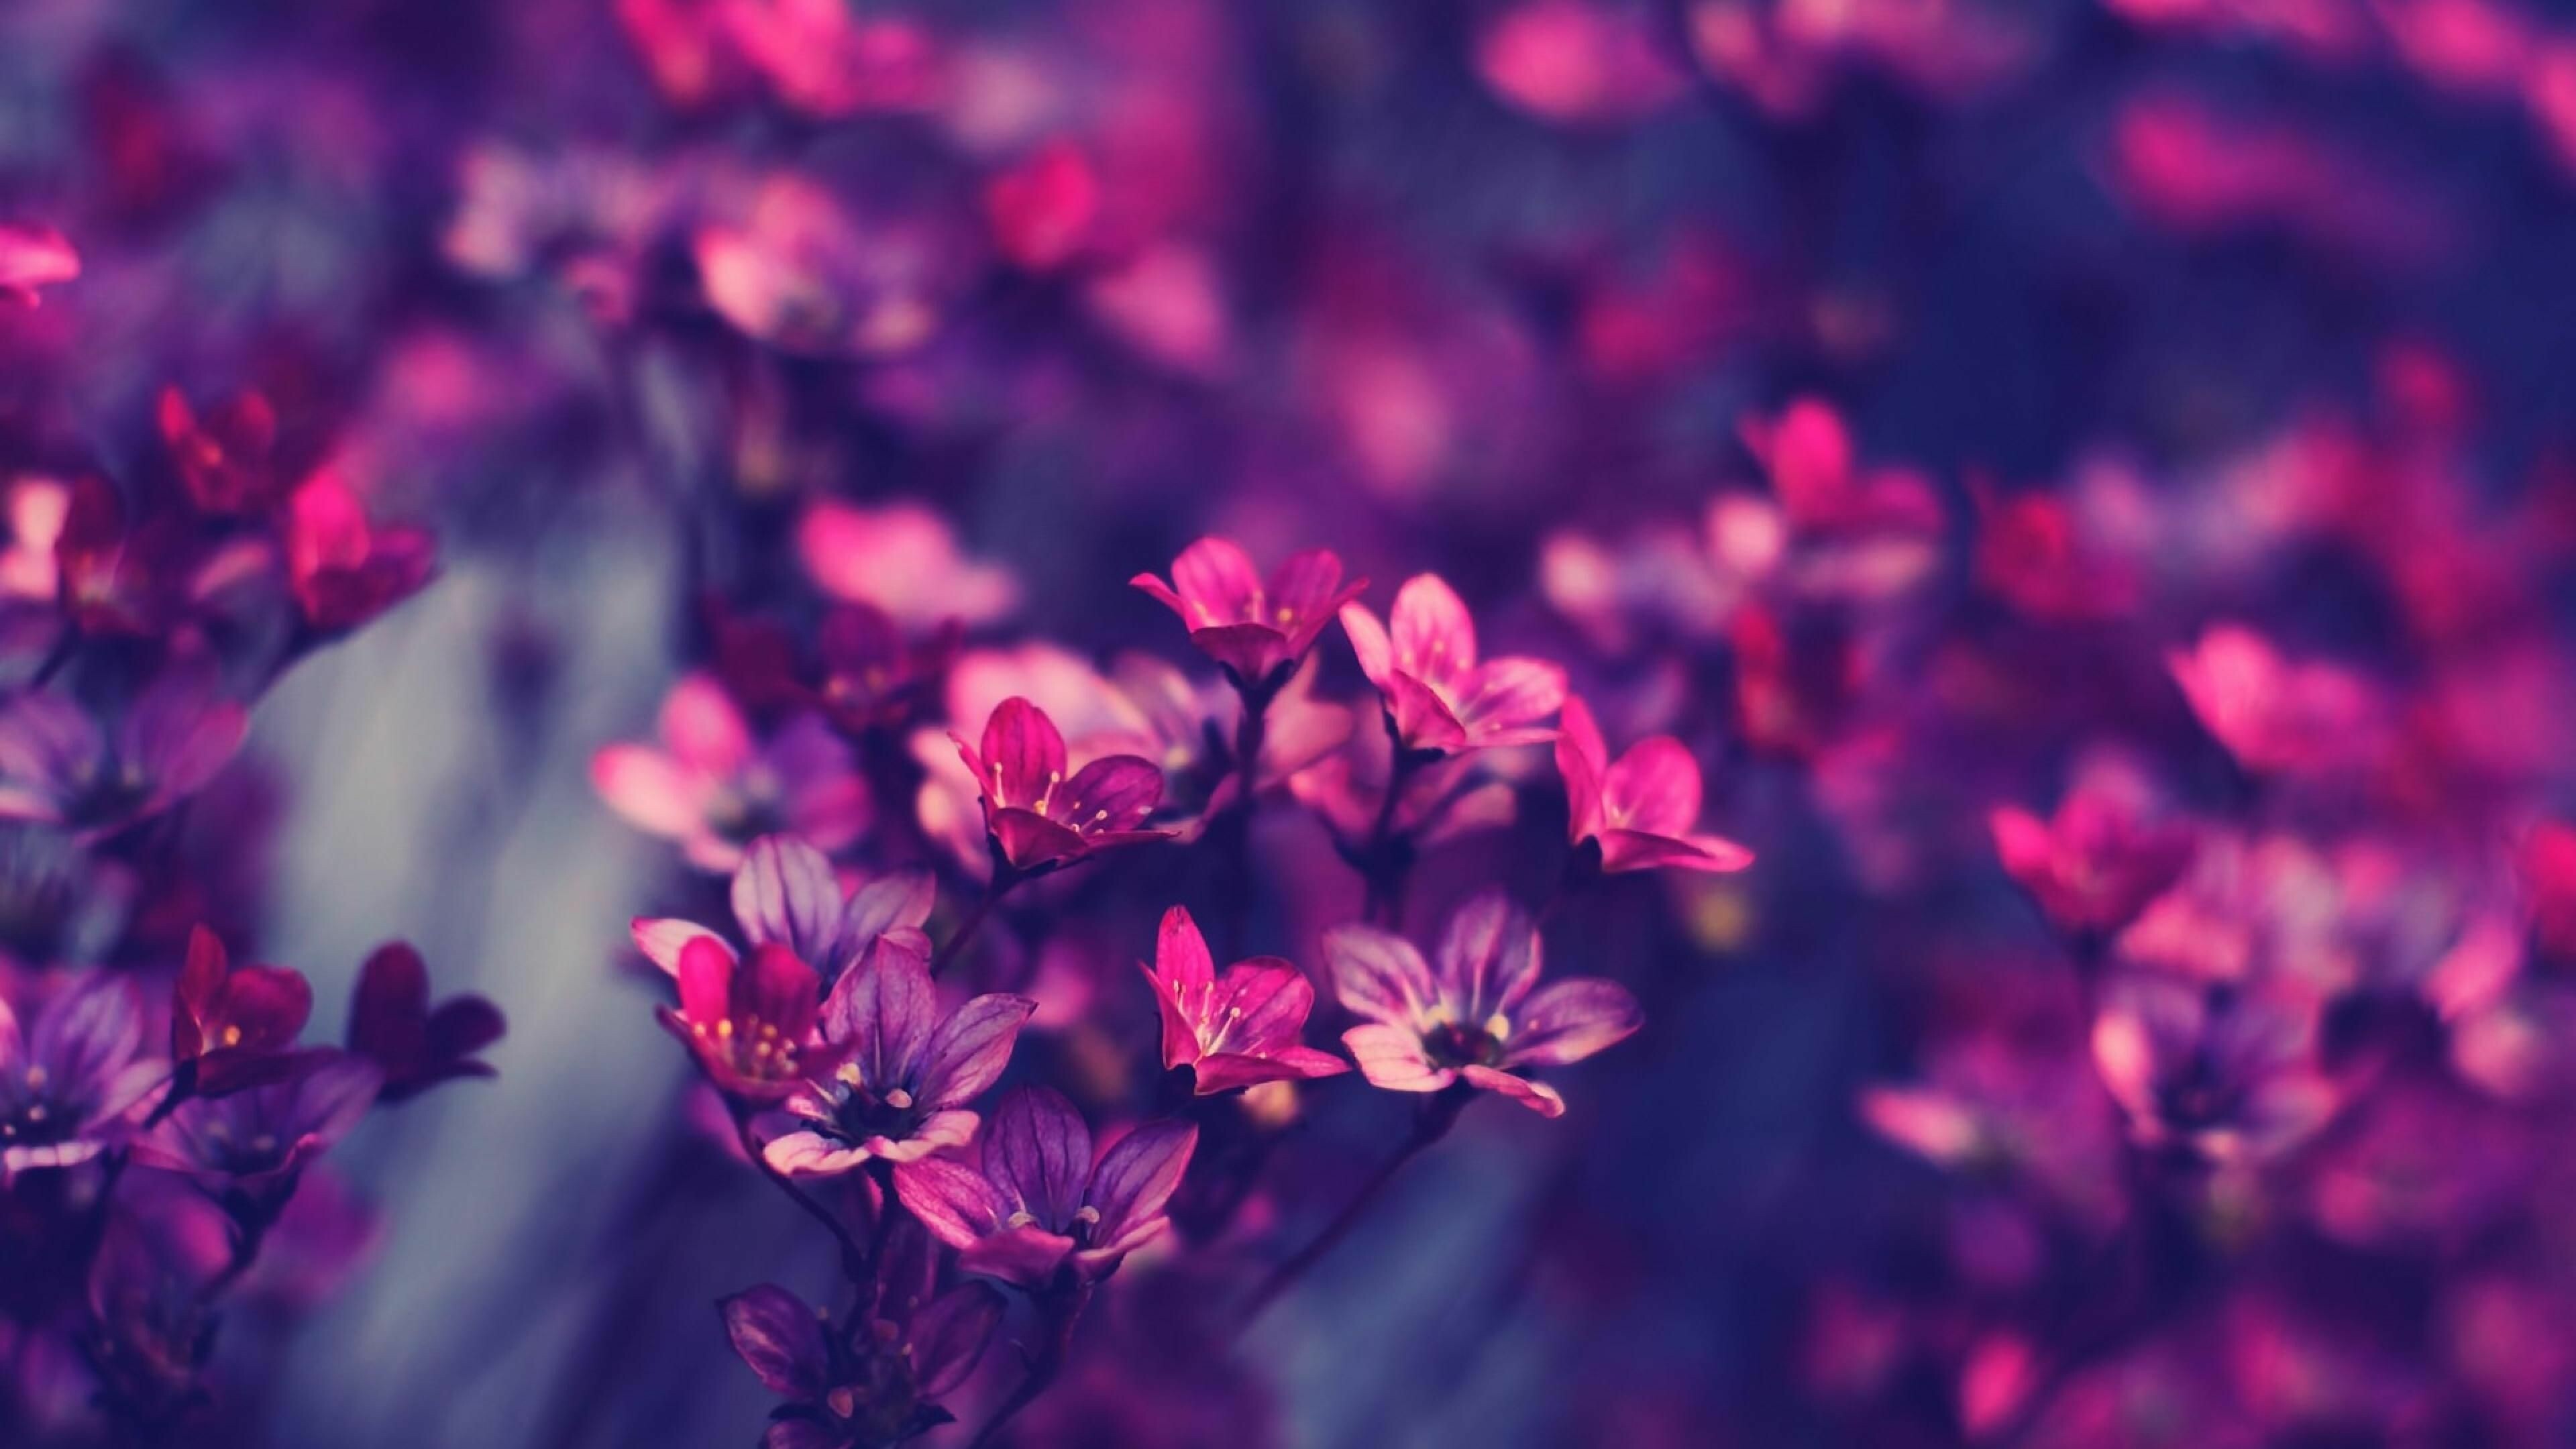 69+ Hipster Flowers Wallpapers: HD, 4K, 5K for PC and Mobile | Download  free images for iPhone, Android